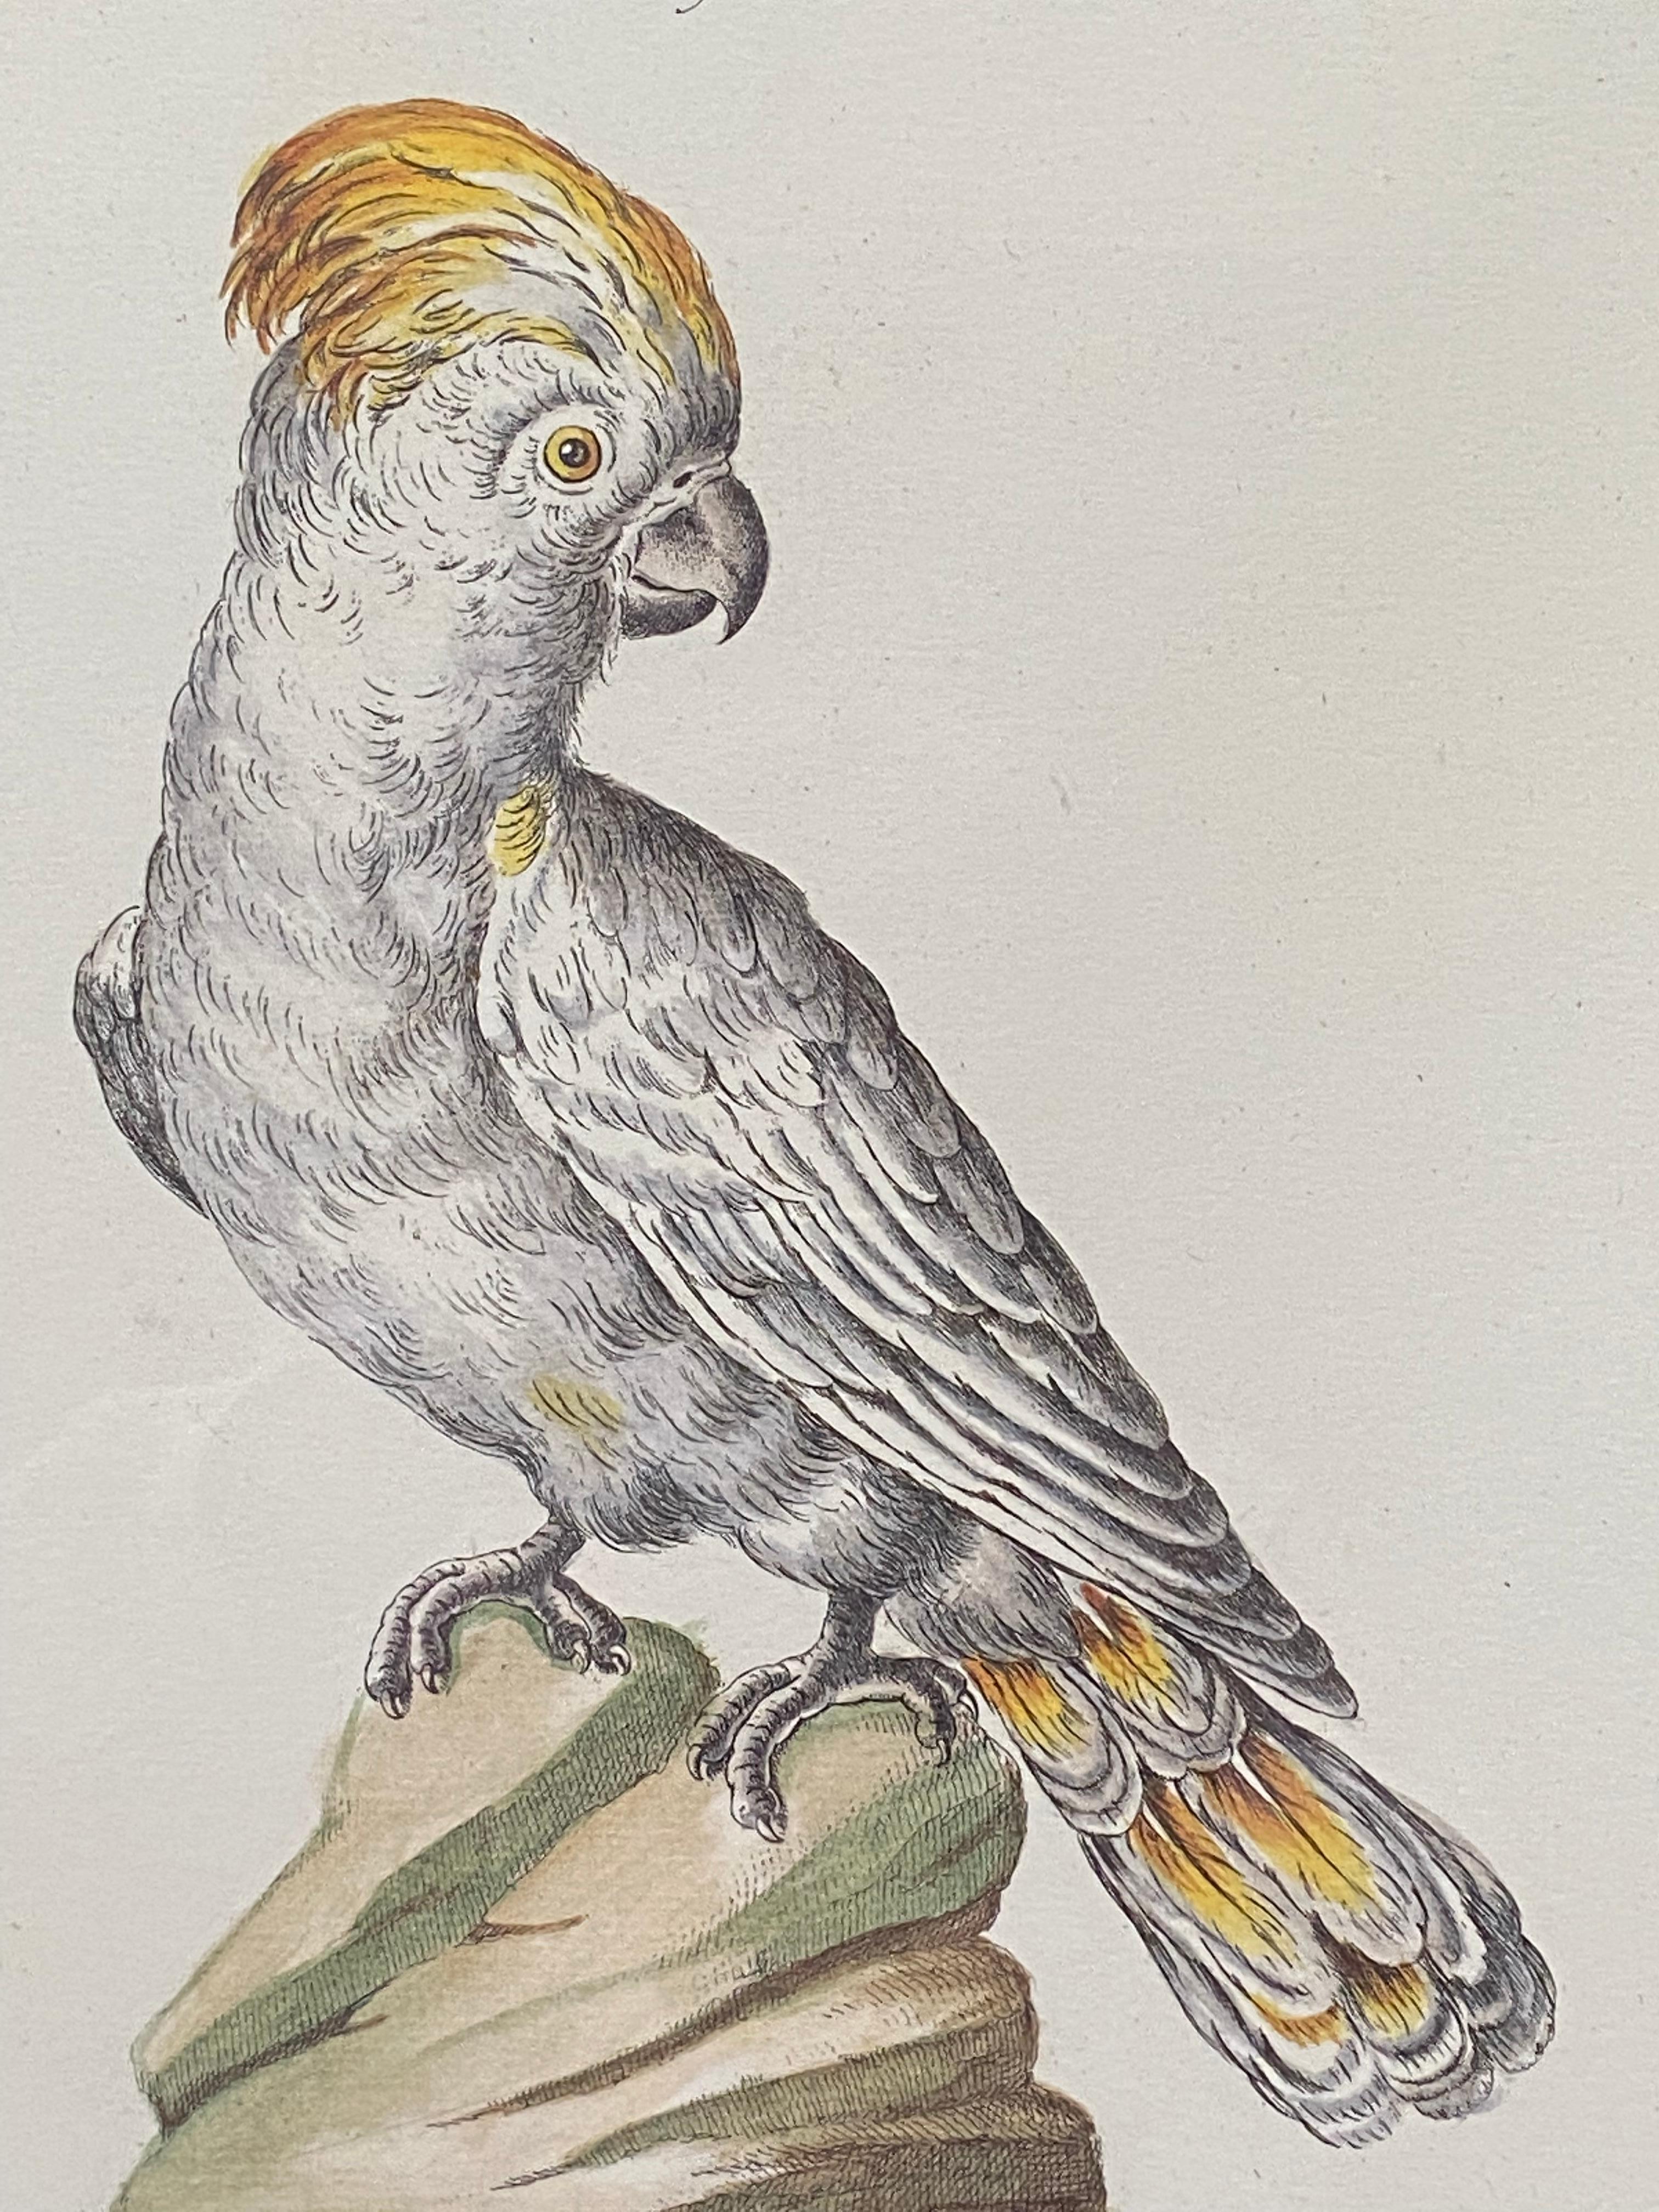 “Yellow Crested Parrot” - Academic Print by Saviero Manetti